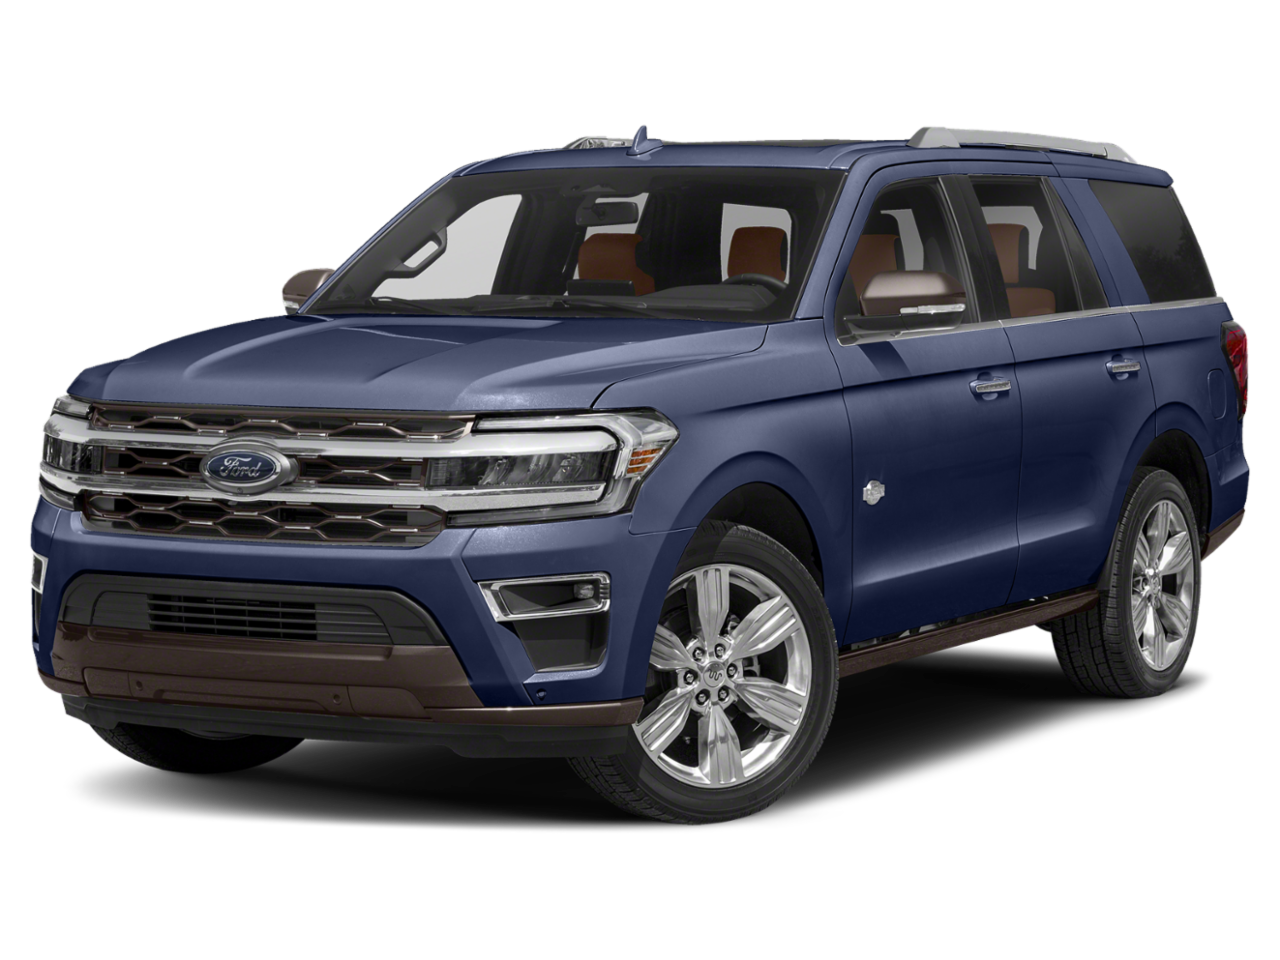 New Ford Expedition from your BROOKLYN, CT dealership, Check Vachon.